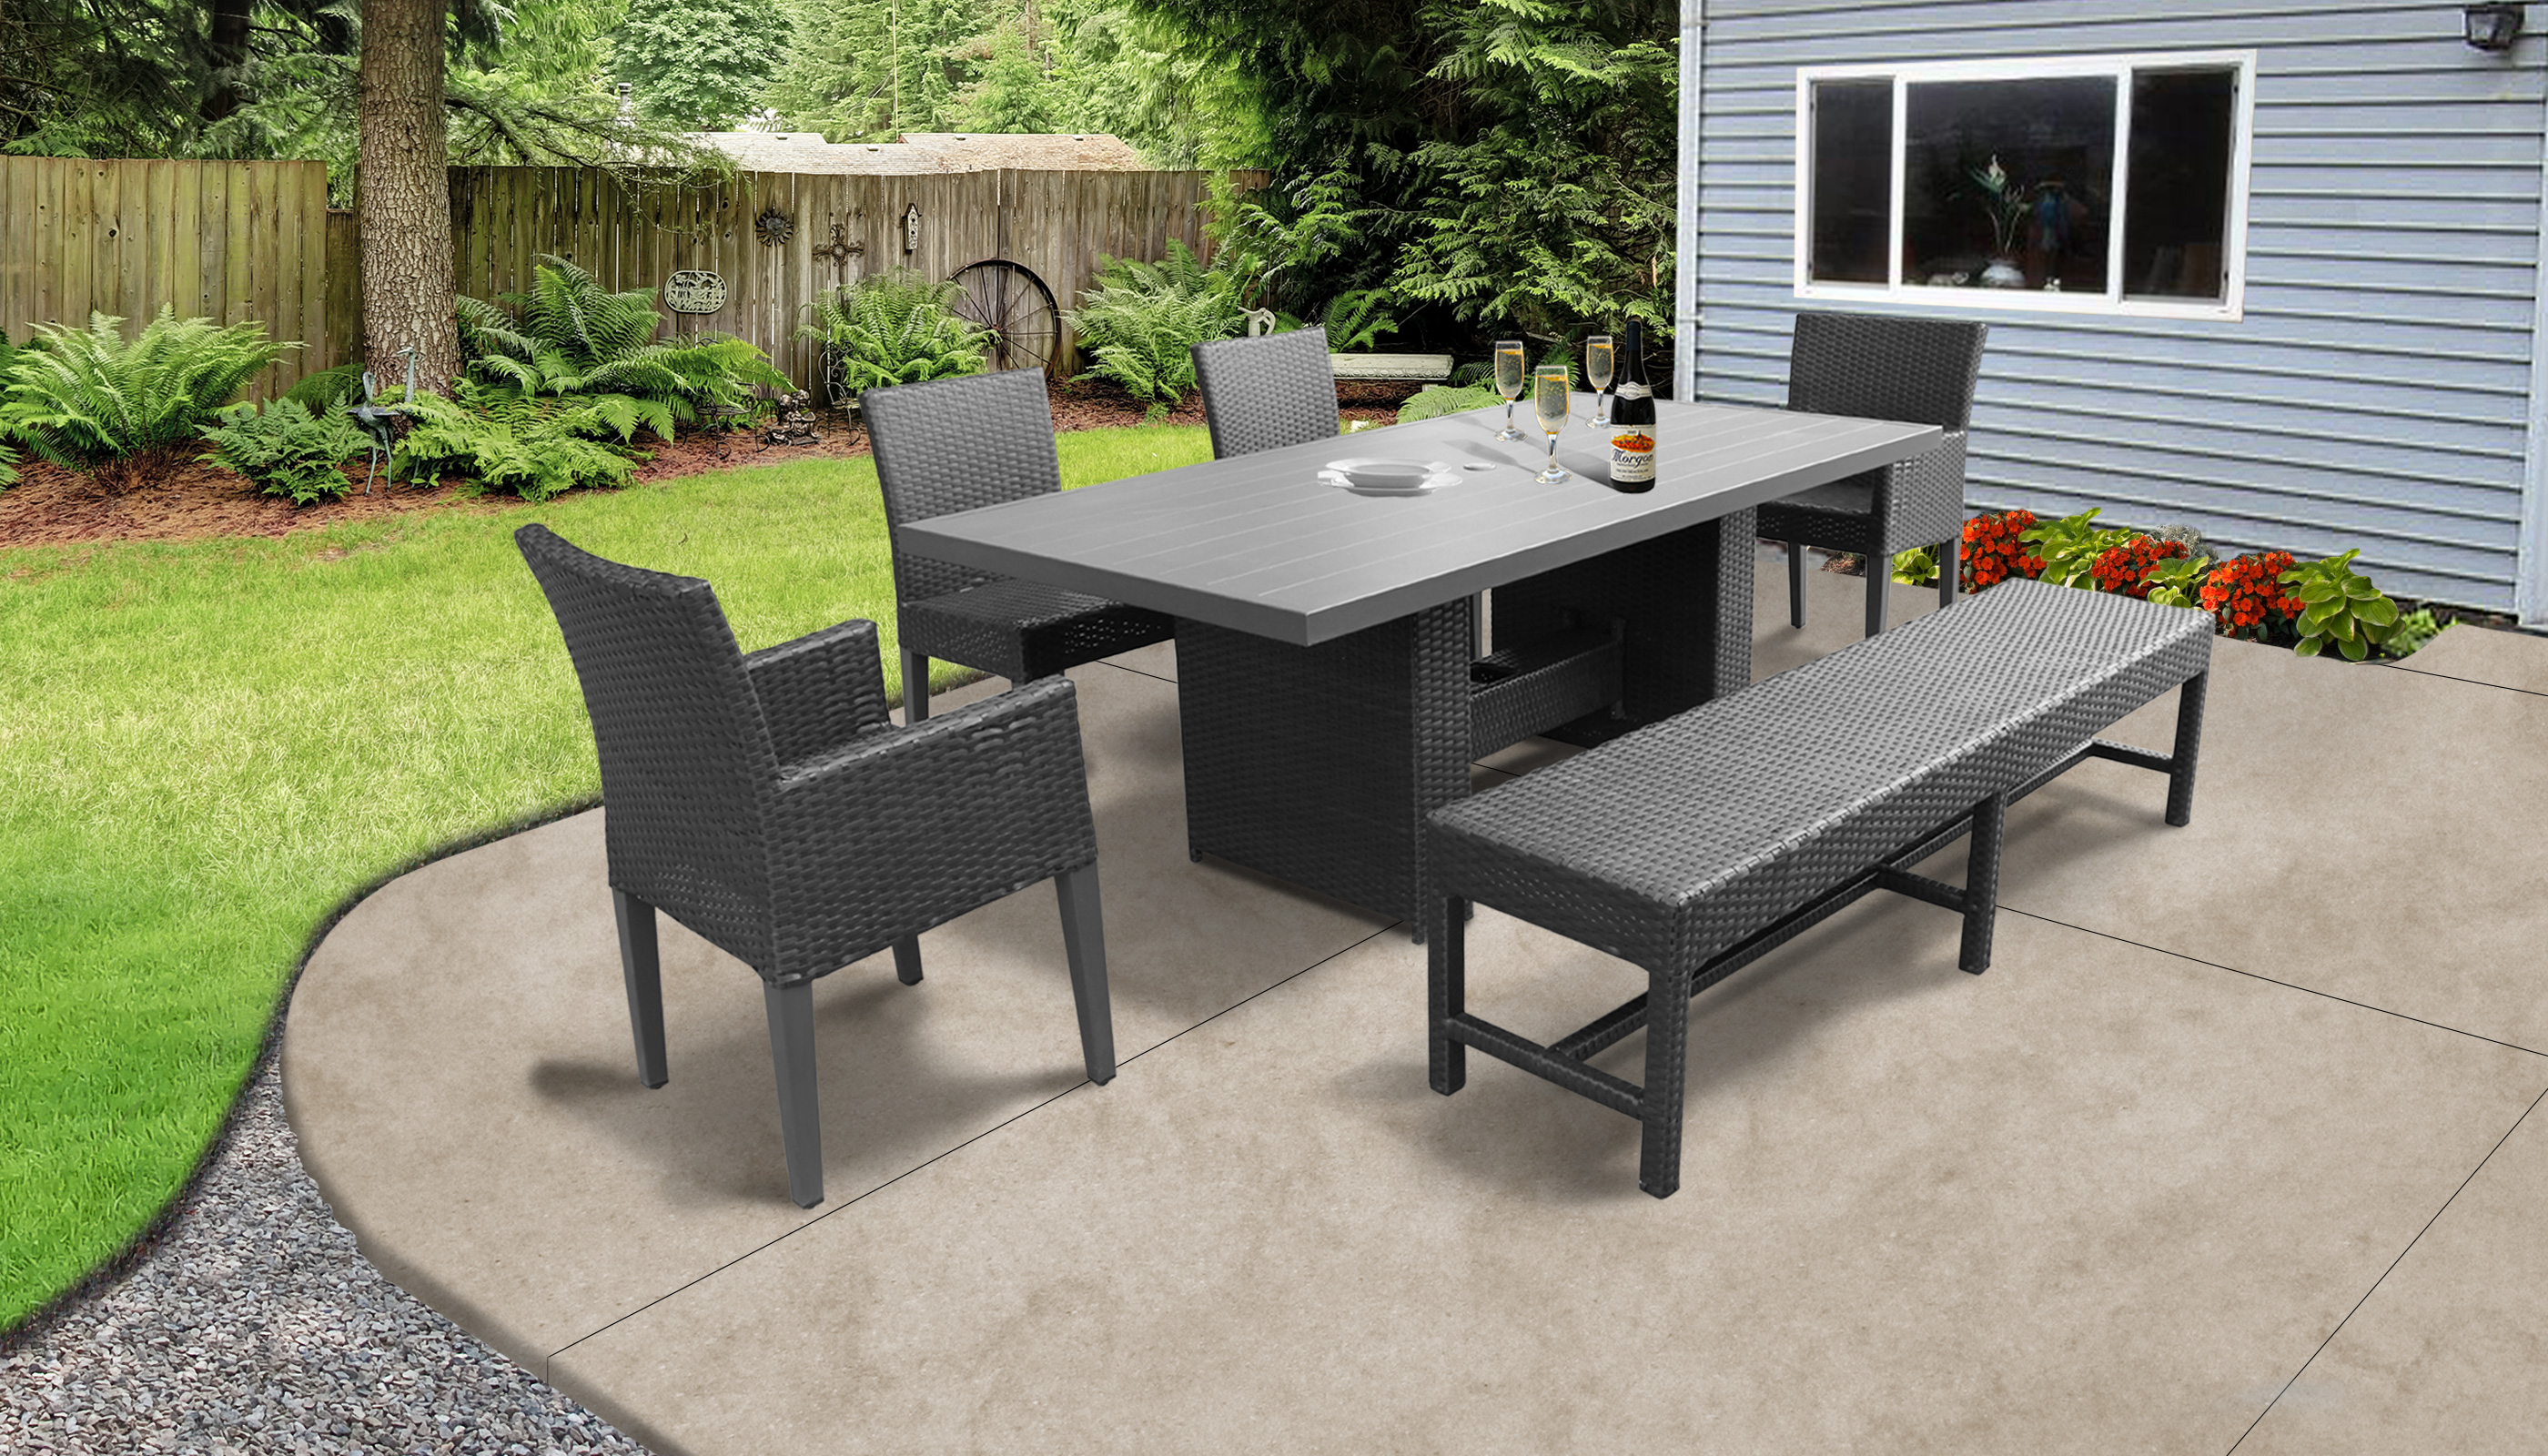 Barbados Rectangular Outdoor Patio Dining Table with 2 Armless Chairs 2